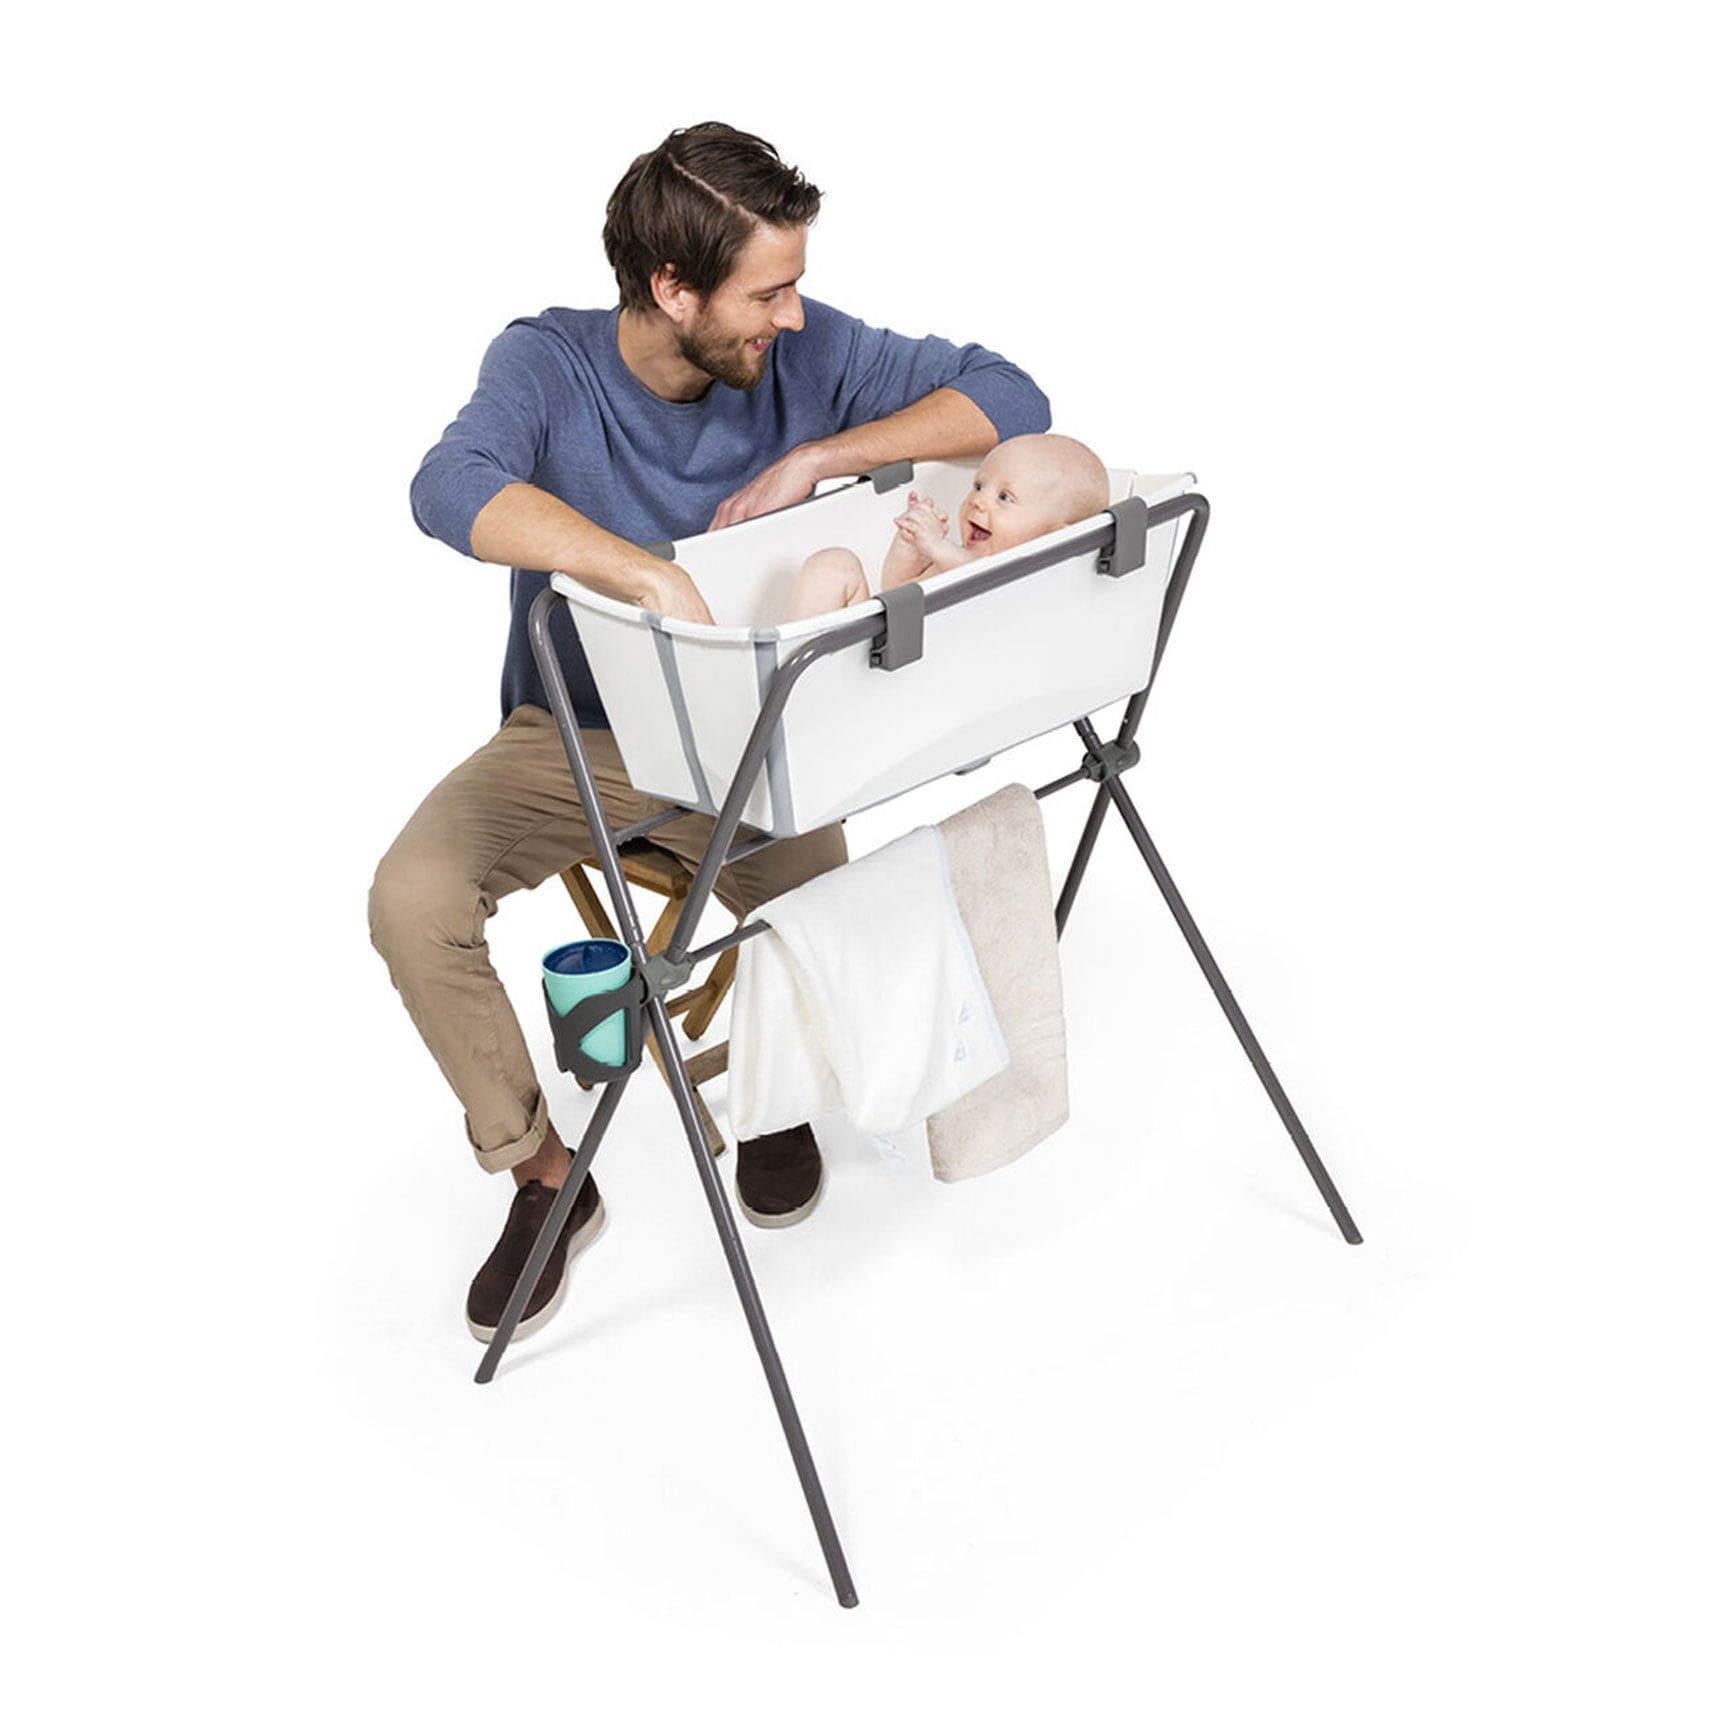 Stokke Flexi Bath® with Newborn Support in White Bathing & Grooming 531501 7040355315018